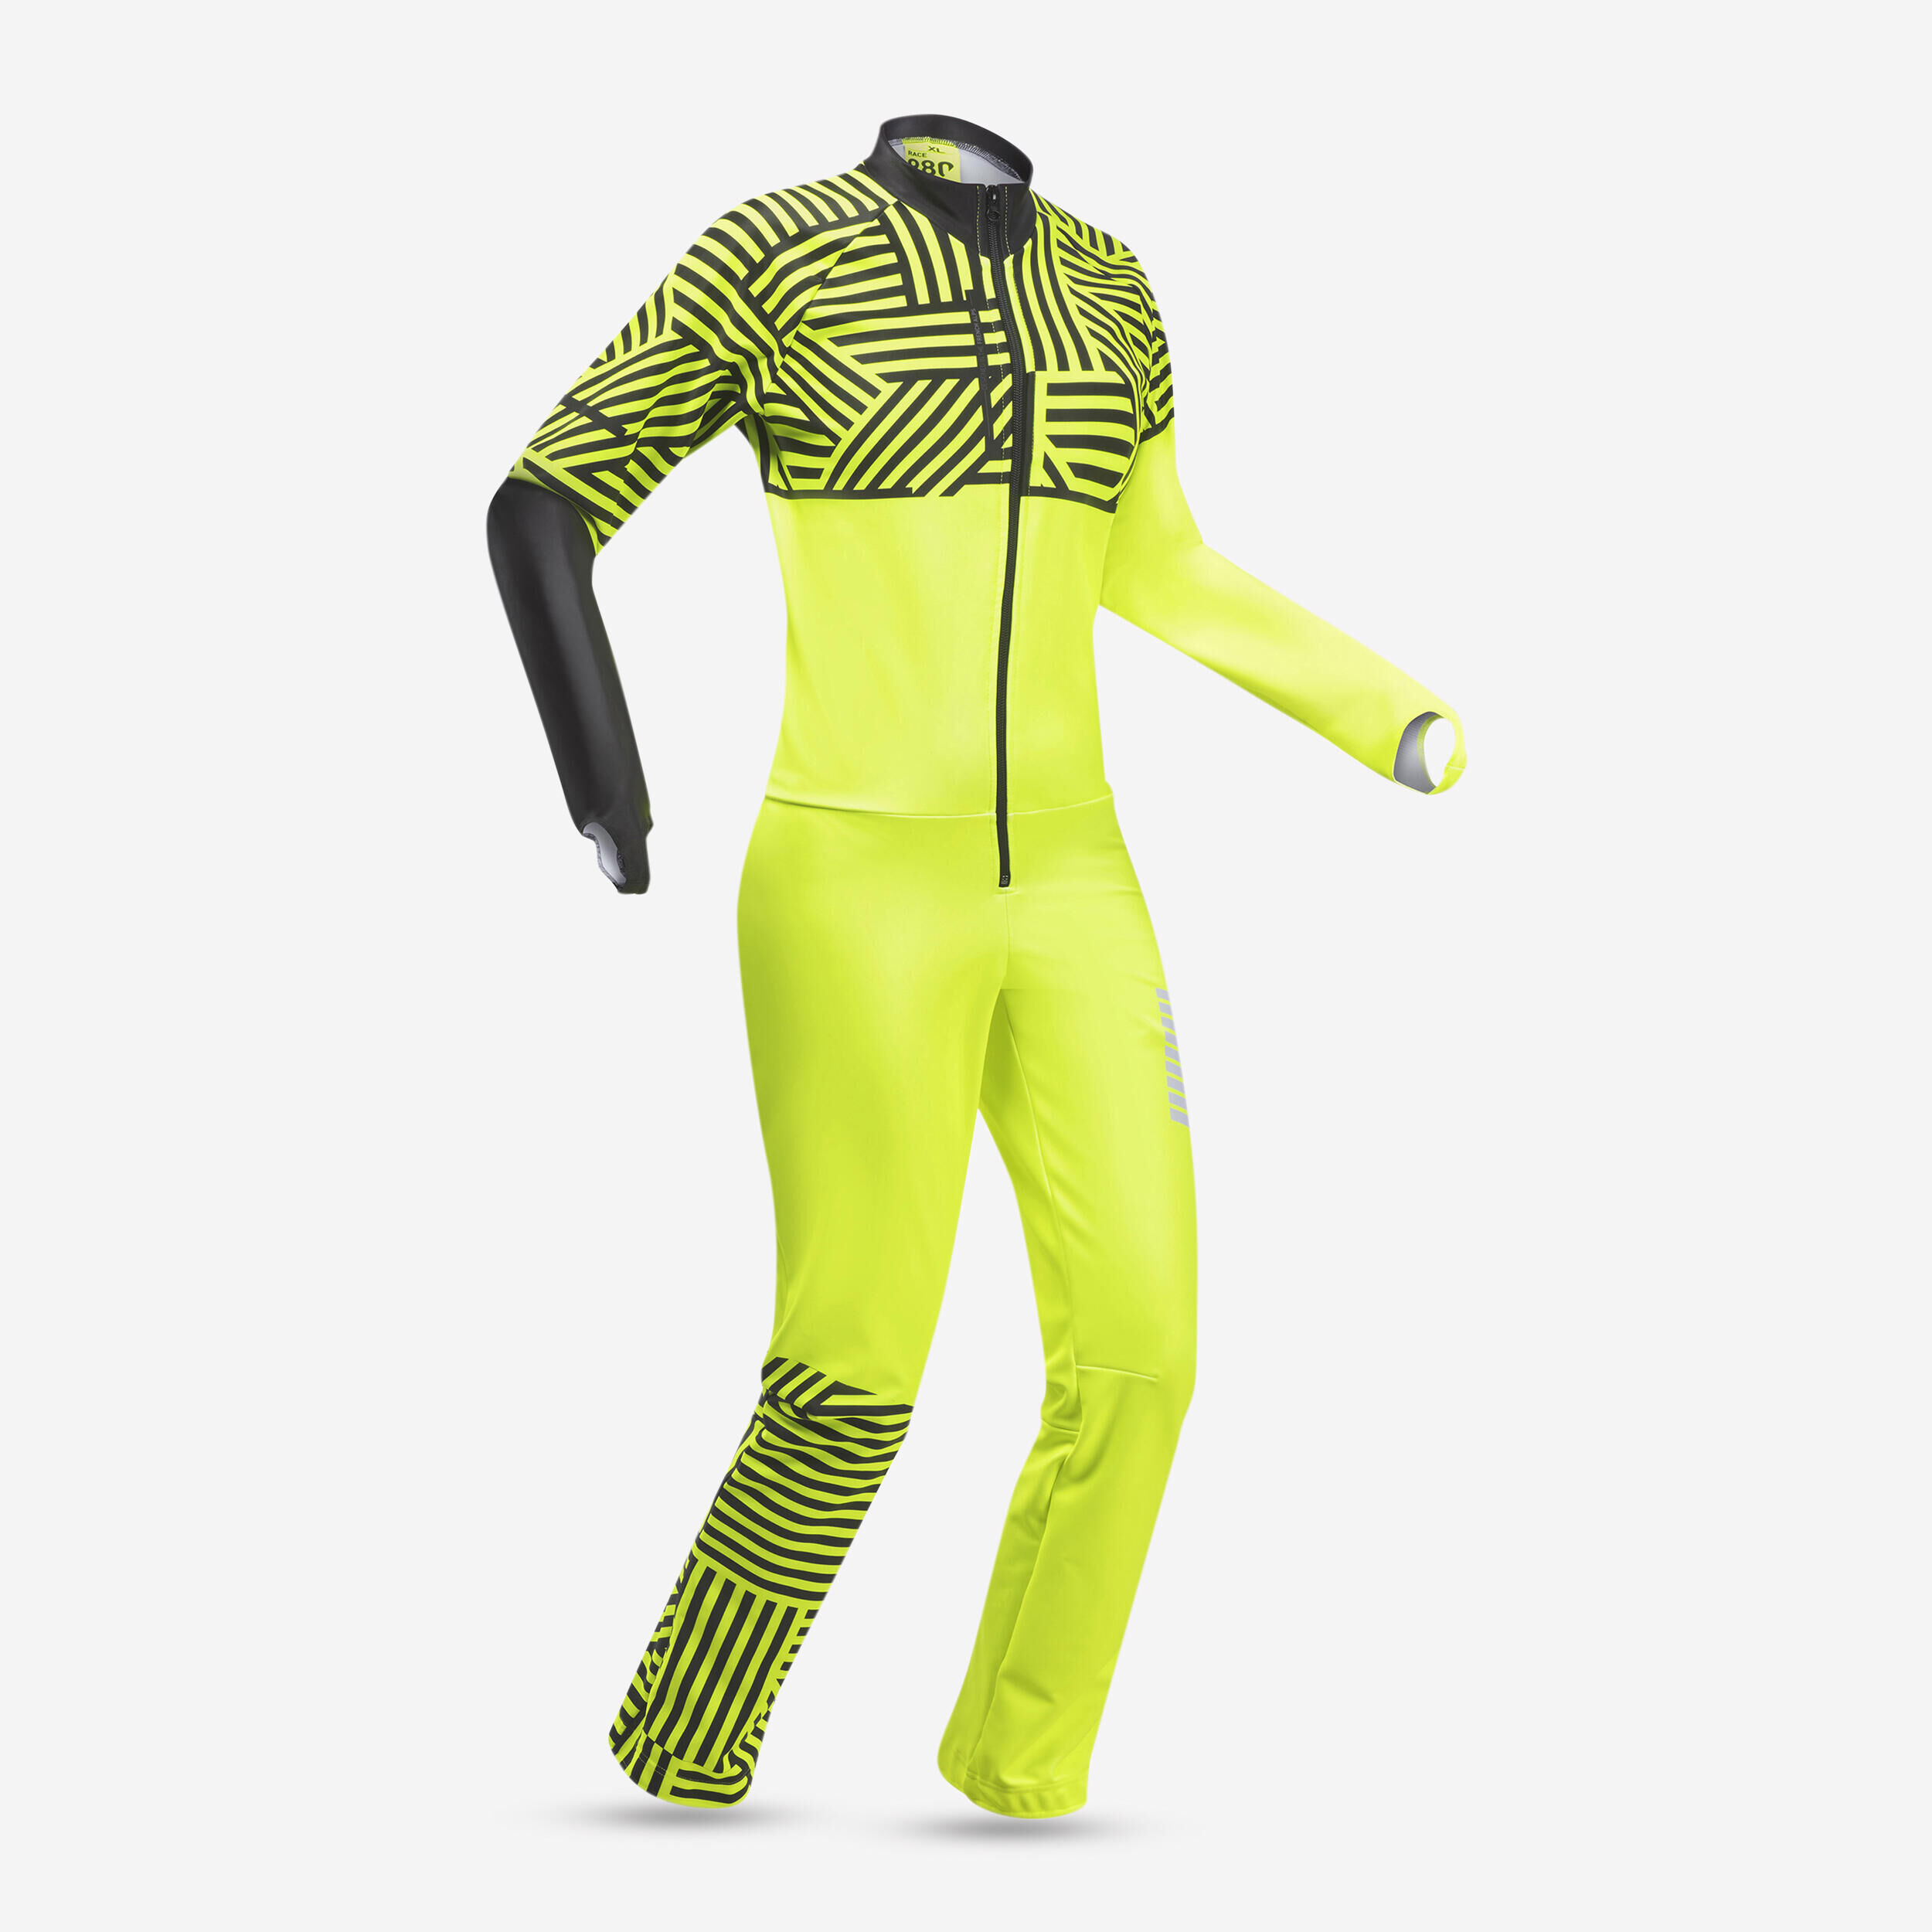 WEDZE KIDS’ SKI COMPETITION SUIT 980 - YELLOW